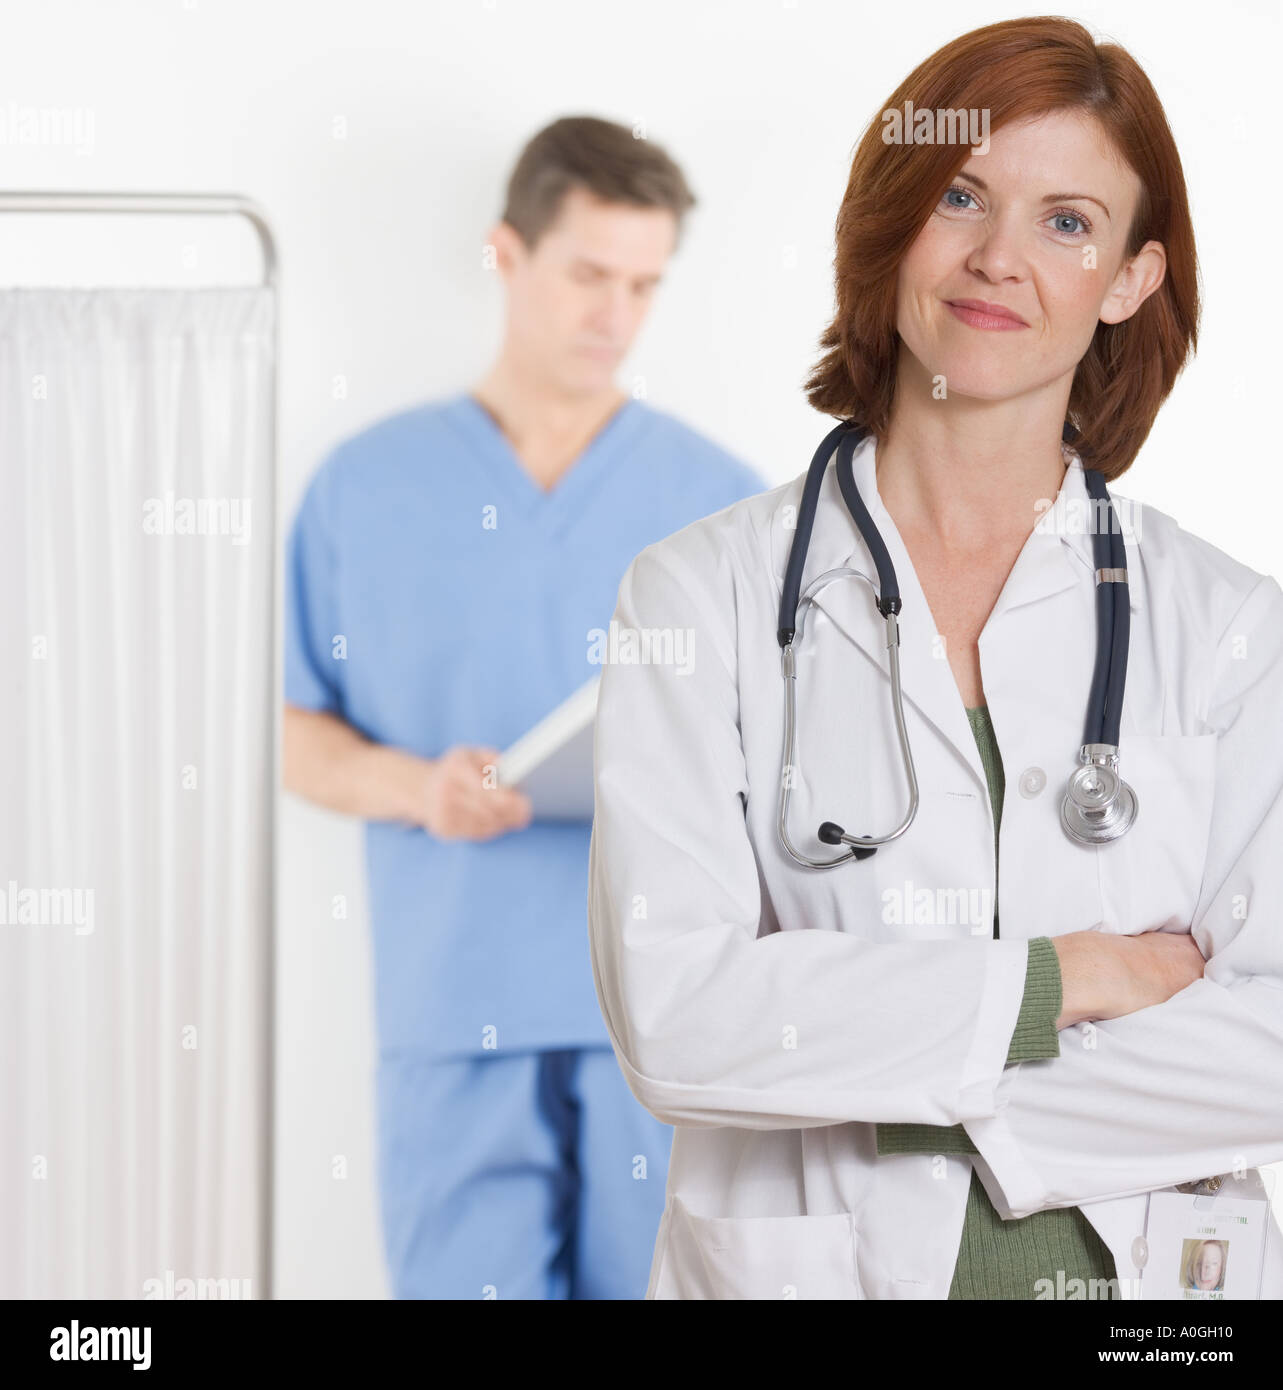 Female doctor smiling confidently Stock Photo